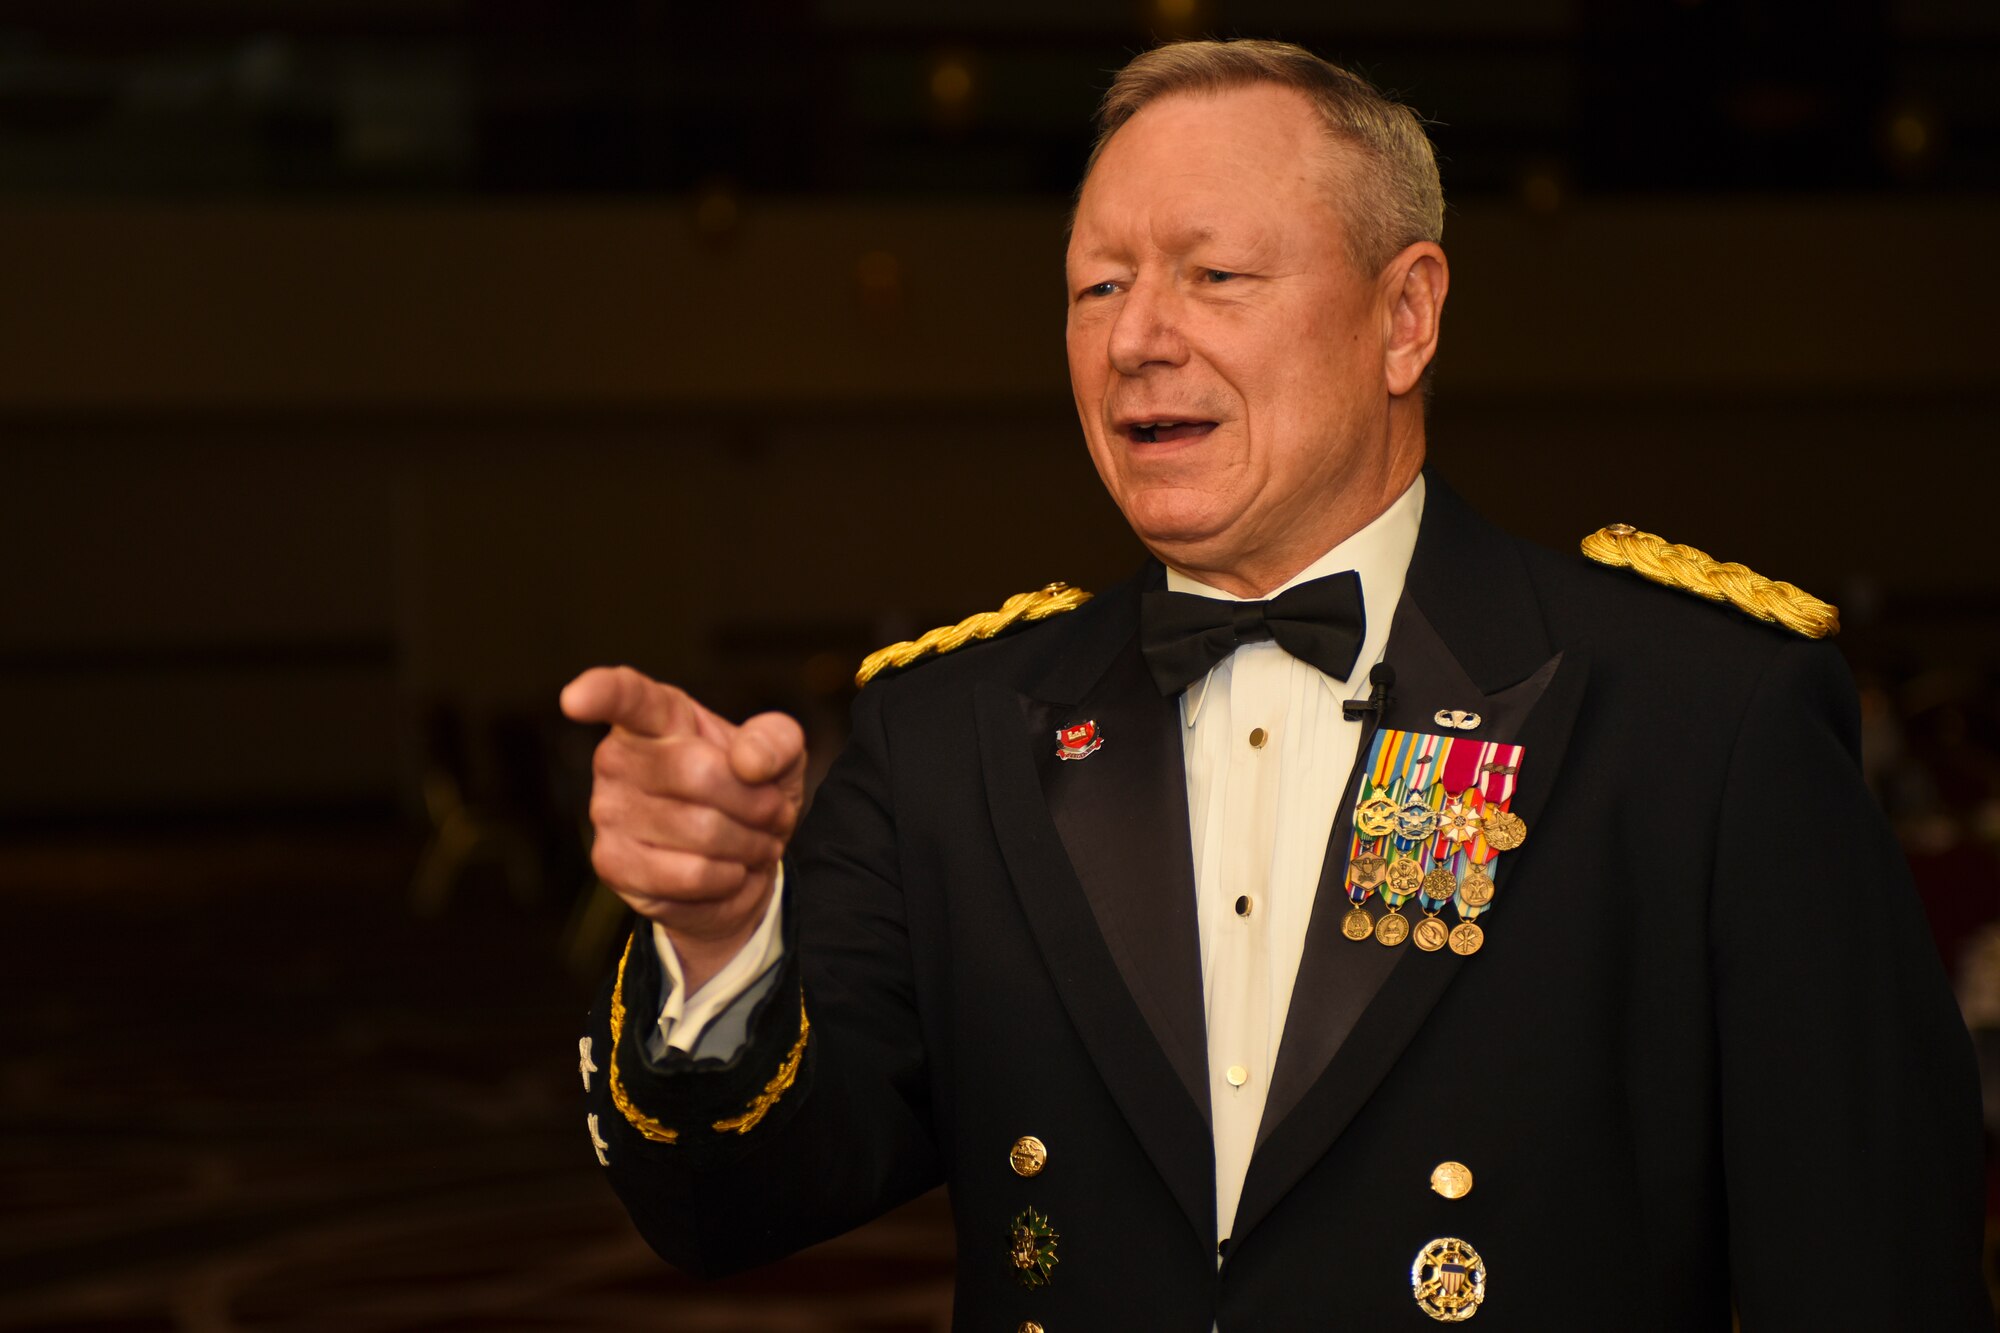 U.S. Army Gen. Frank J. Grass, Chief of the National Guard Bureau, gives an interview prior to the Ohio National Guard Association and Ohio National Guard Enlisted Association Spring Dinner Dance, Columbus, Ohio, April 25, 2015. Gen. Grass was the guest speaker at the event which is held annually for association members in both the Air and Army National Guard. (U.S. National Guard photo by Senior Airman Wendy Kuhn/Released)